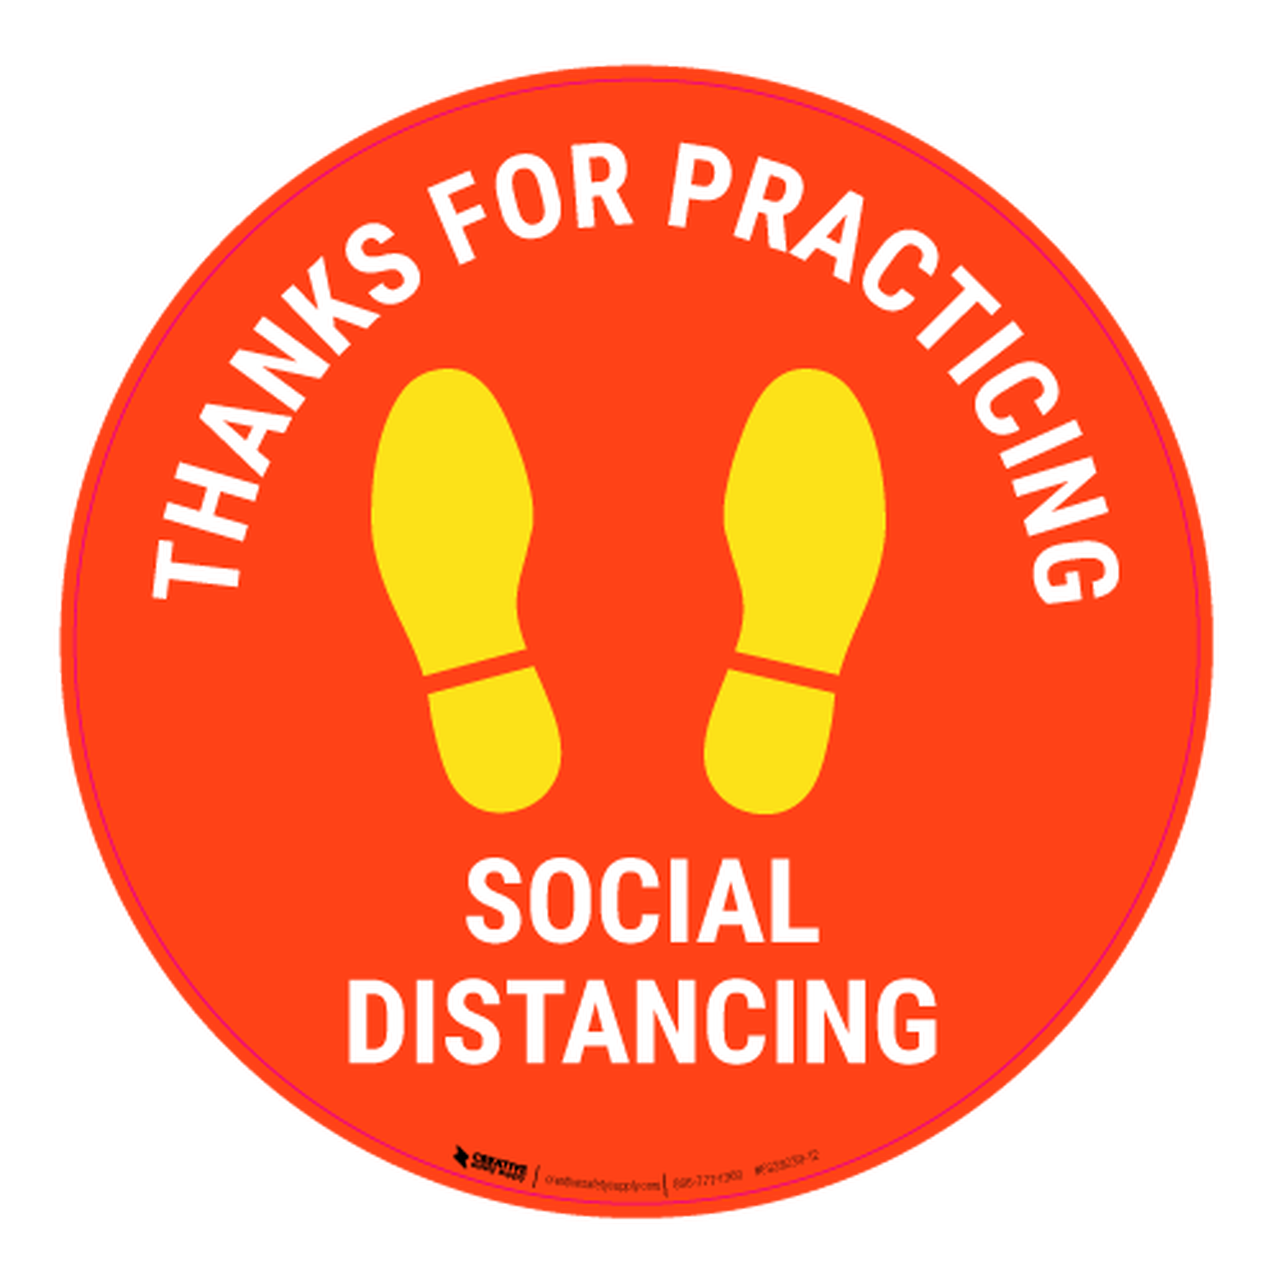 illustration of a circle with footprints inside that says 'thanks for practicing social distancing'